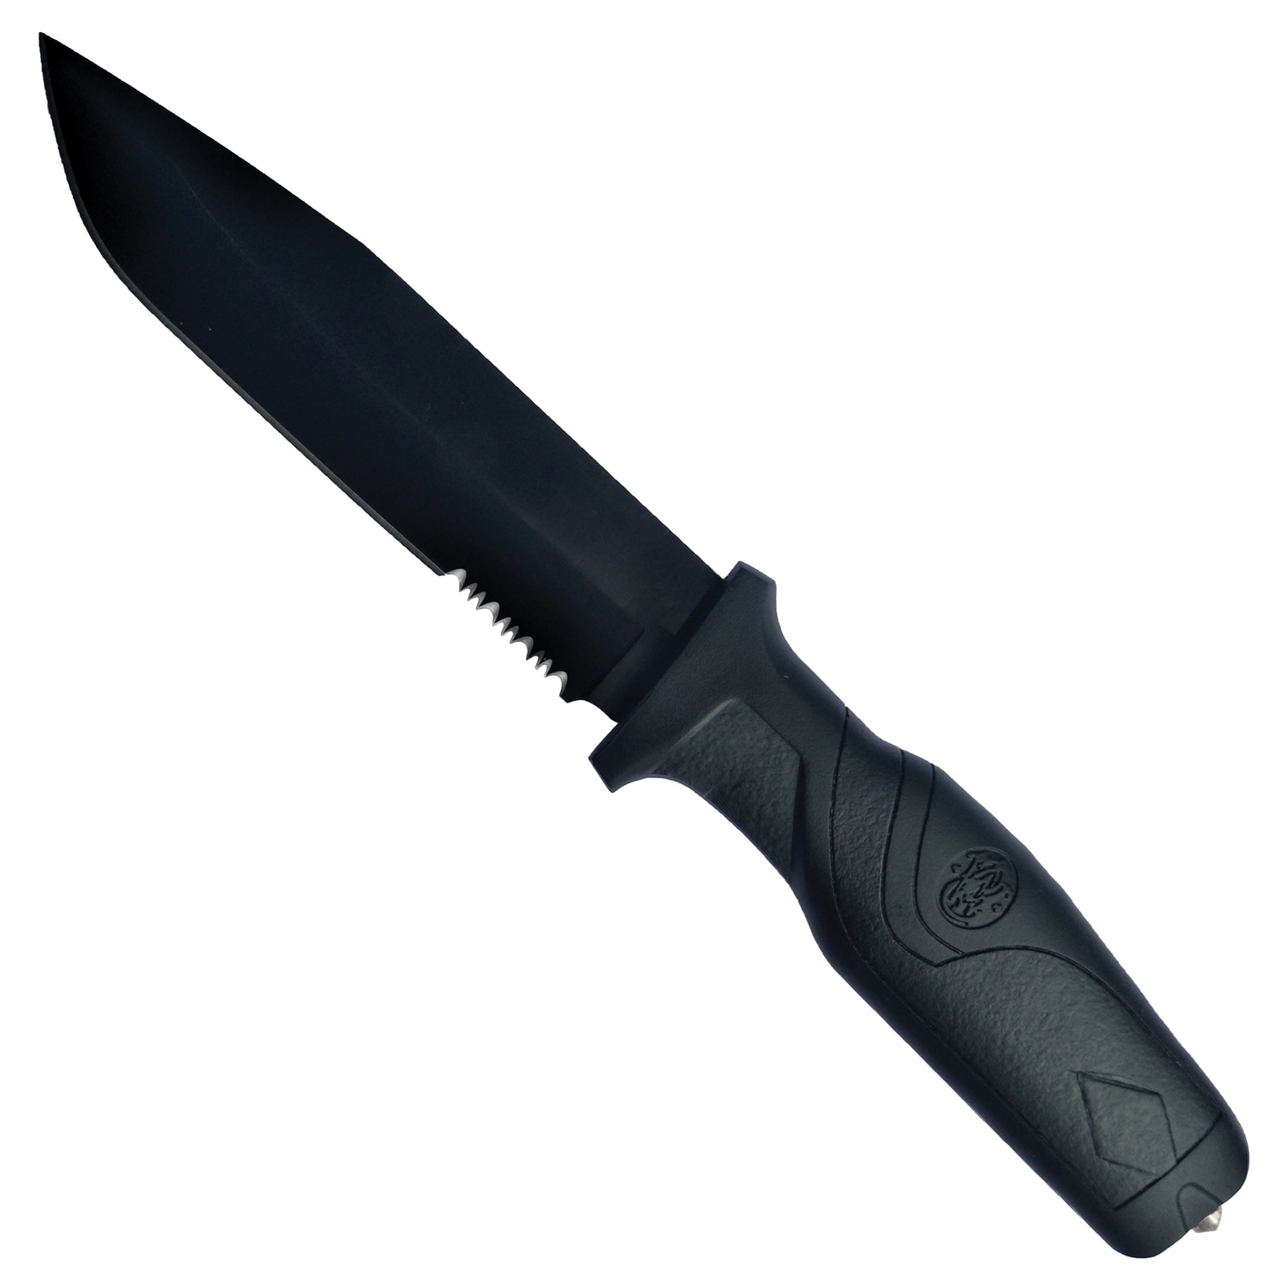 Smith & Wesson Search & Rescue Fixed Blade Tactical Knife